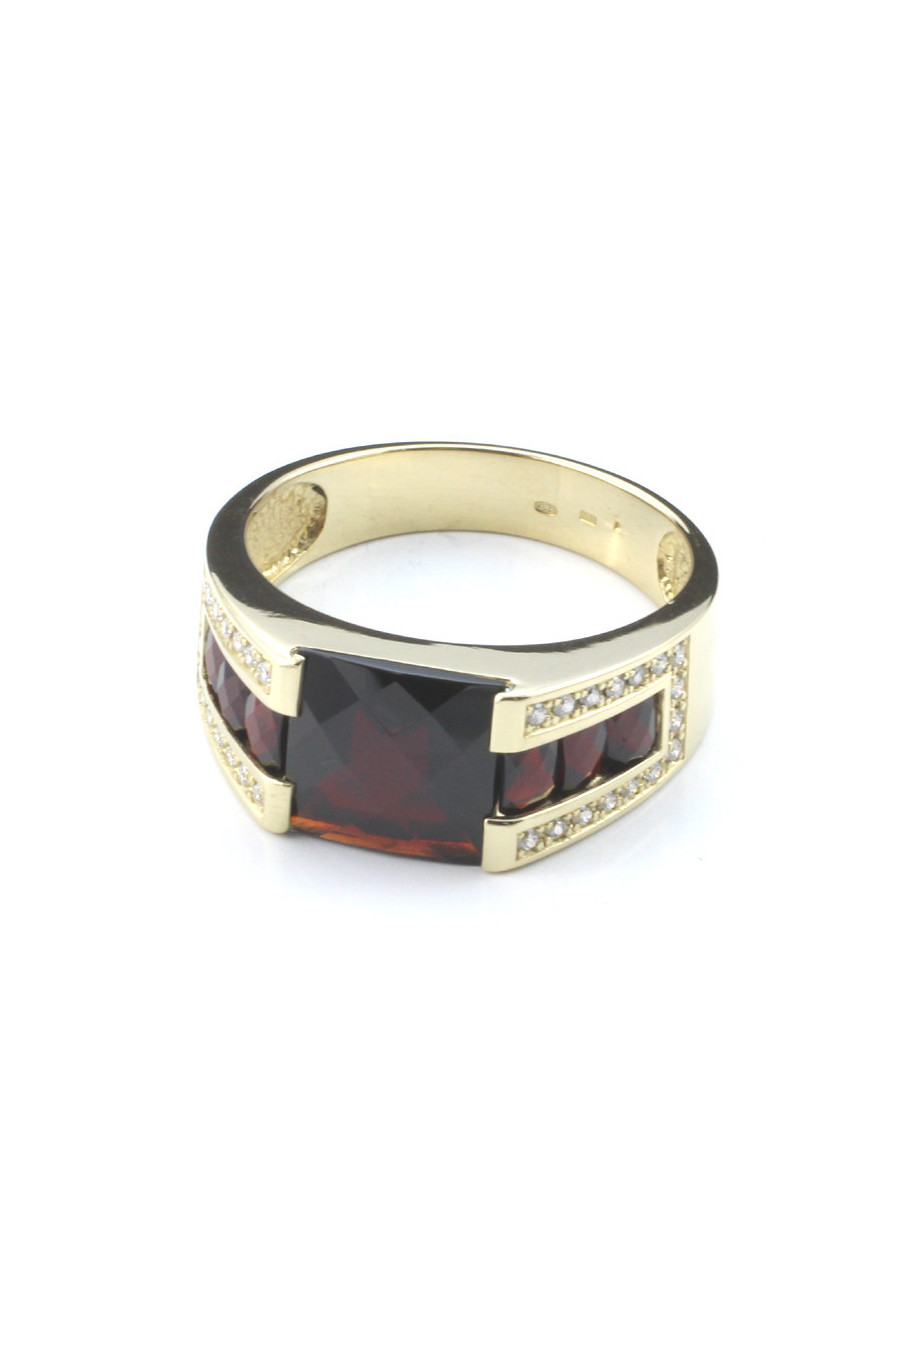 Men's gold ring with garnet and diamonds